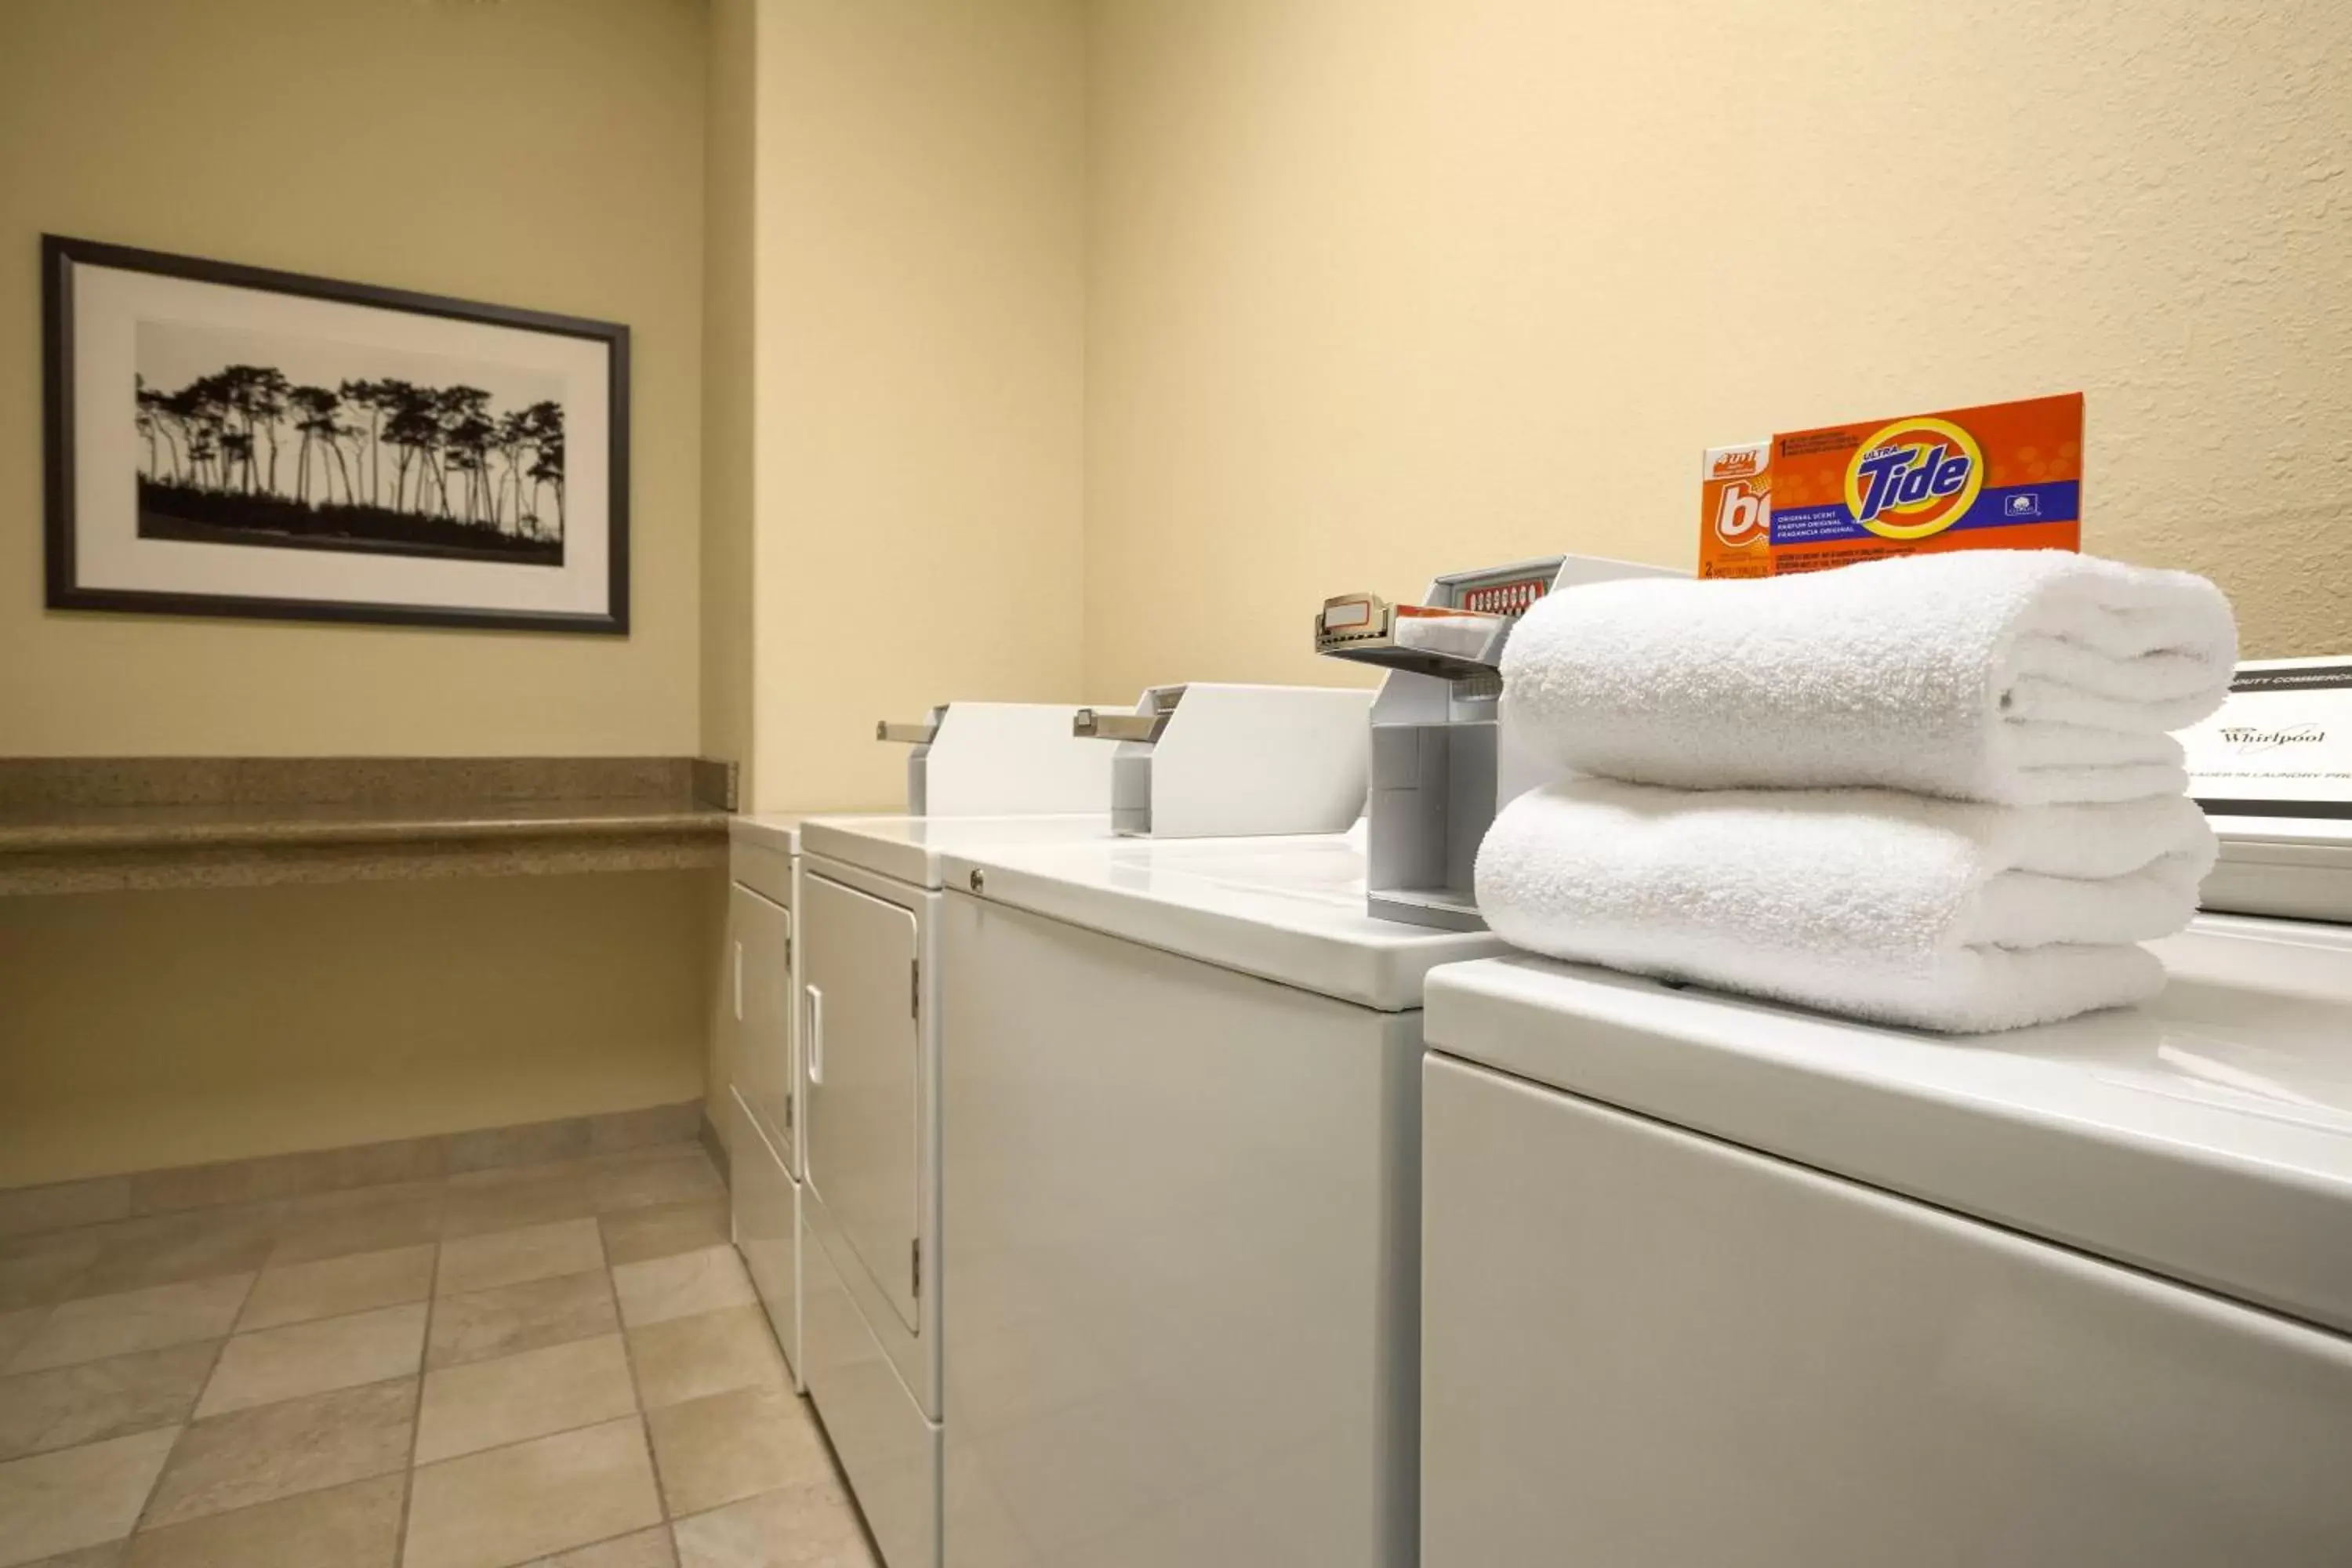 Area and facilities in Country Inn & Suites by Radisson, Big Rapids, MI